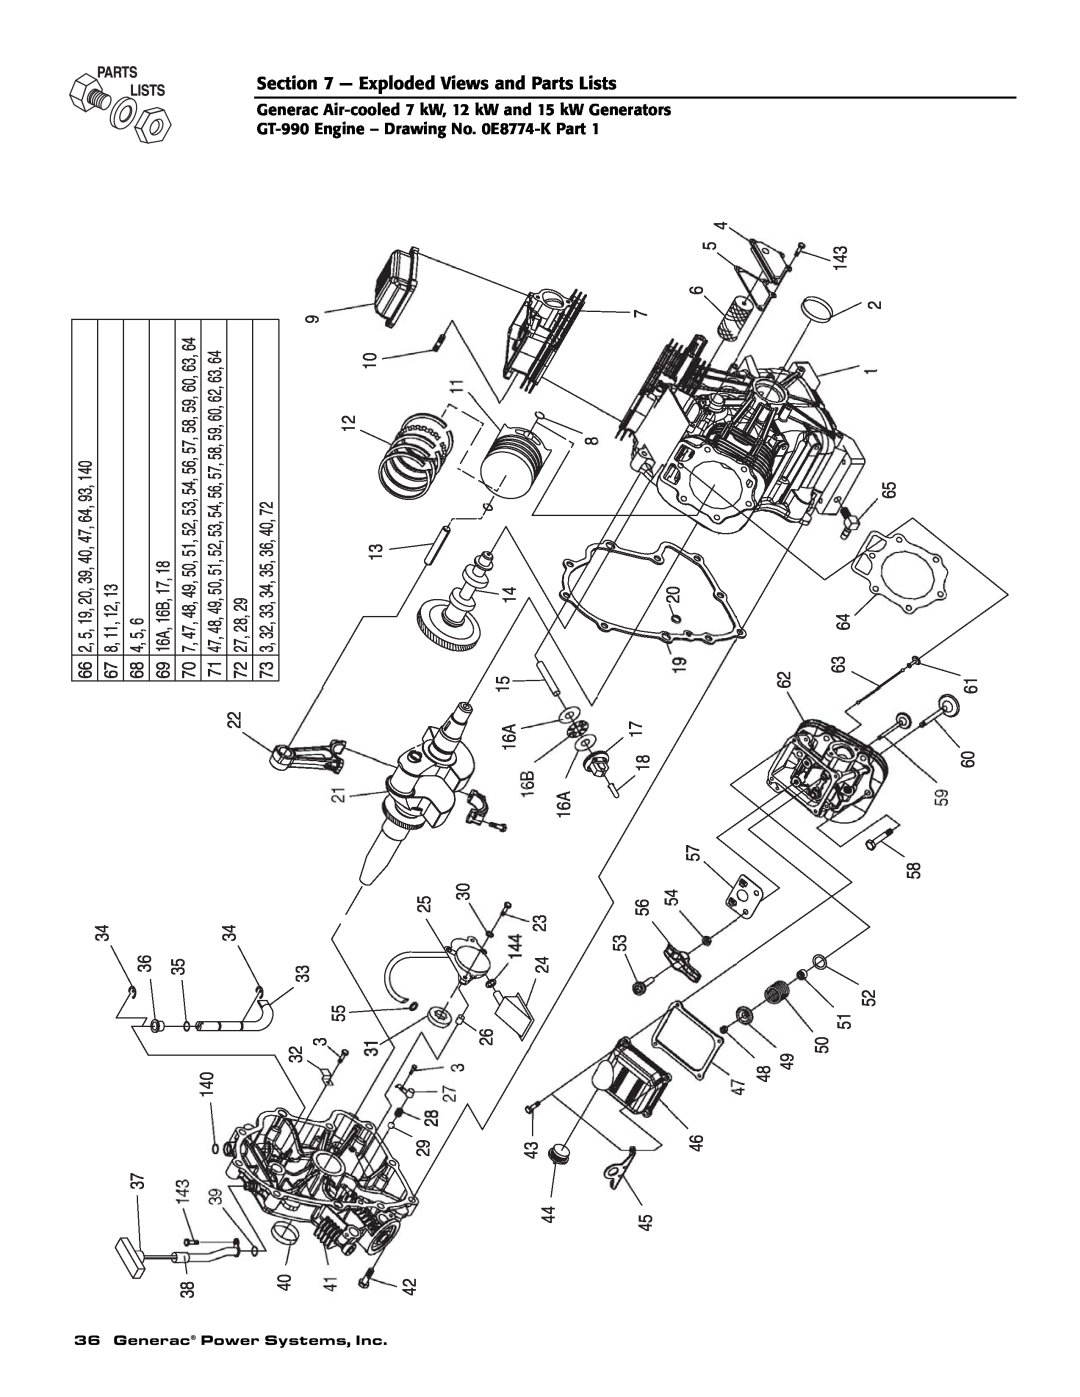 Generac 04674-2 1310, 16B 16A, 6 5 143, and Parts Lists, GT-990 Engine - Drawing, Generac Air-cooled 7 kW, Exploded Views 